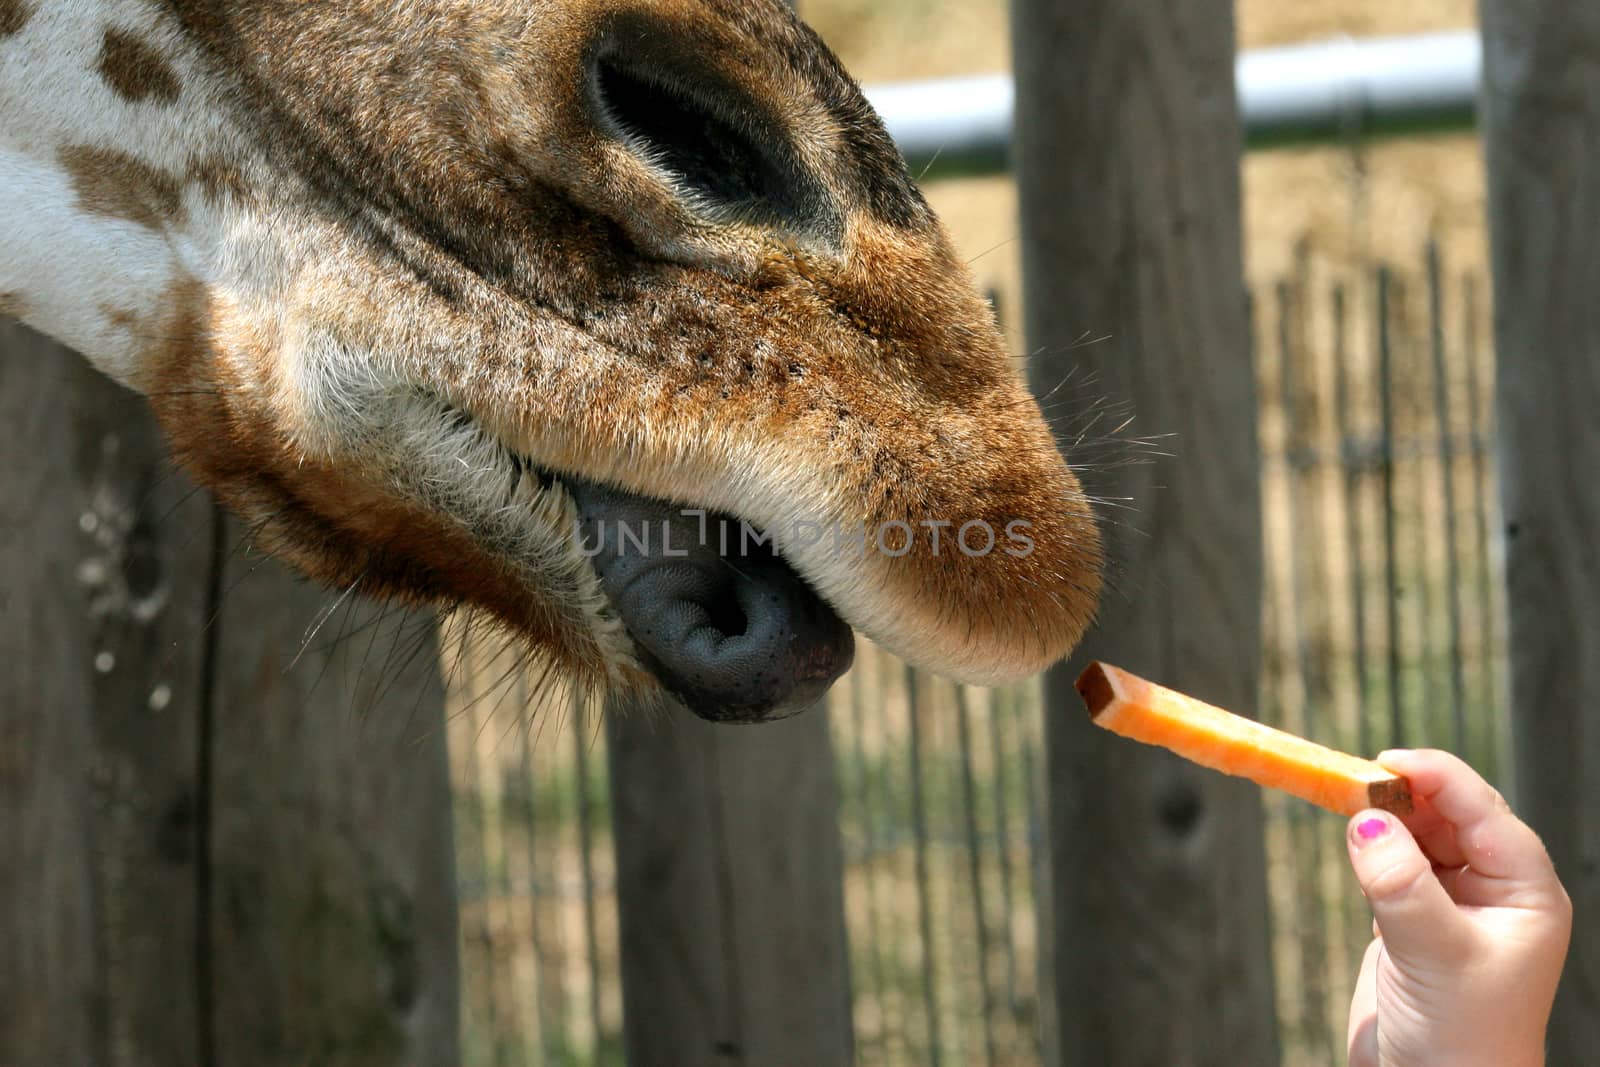 Image showing a giraffe sticking out its blue tongue taking a piece of carrot from its keeper.